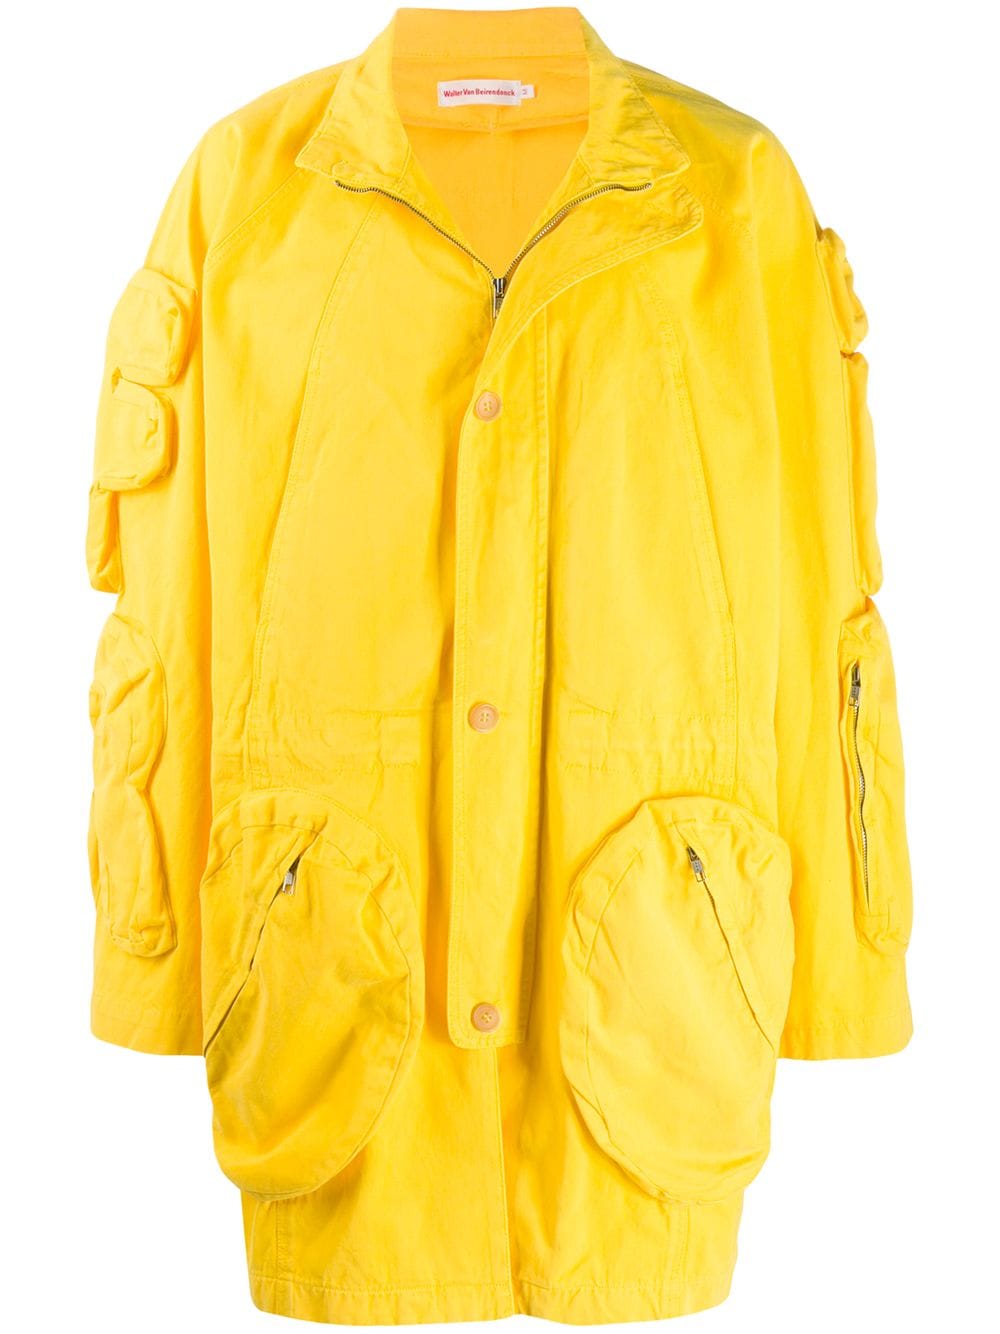 Walter Van Beirendonck Pre-Owned 2010/11's Take A W-Ride cargo coat - Yellow von Walter Van Beirendonck Pre-Owned